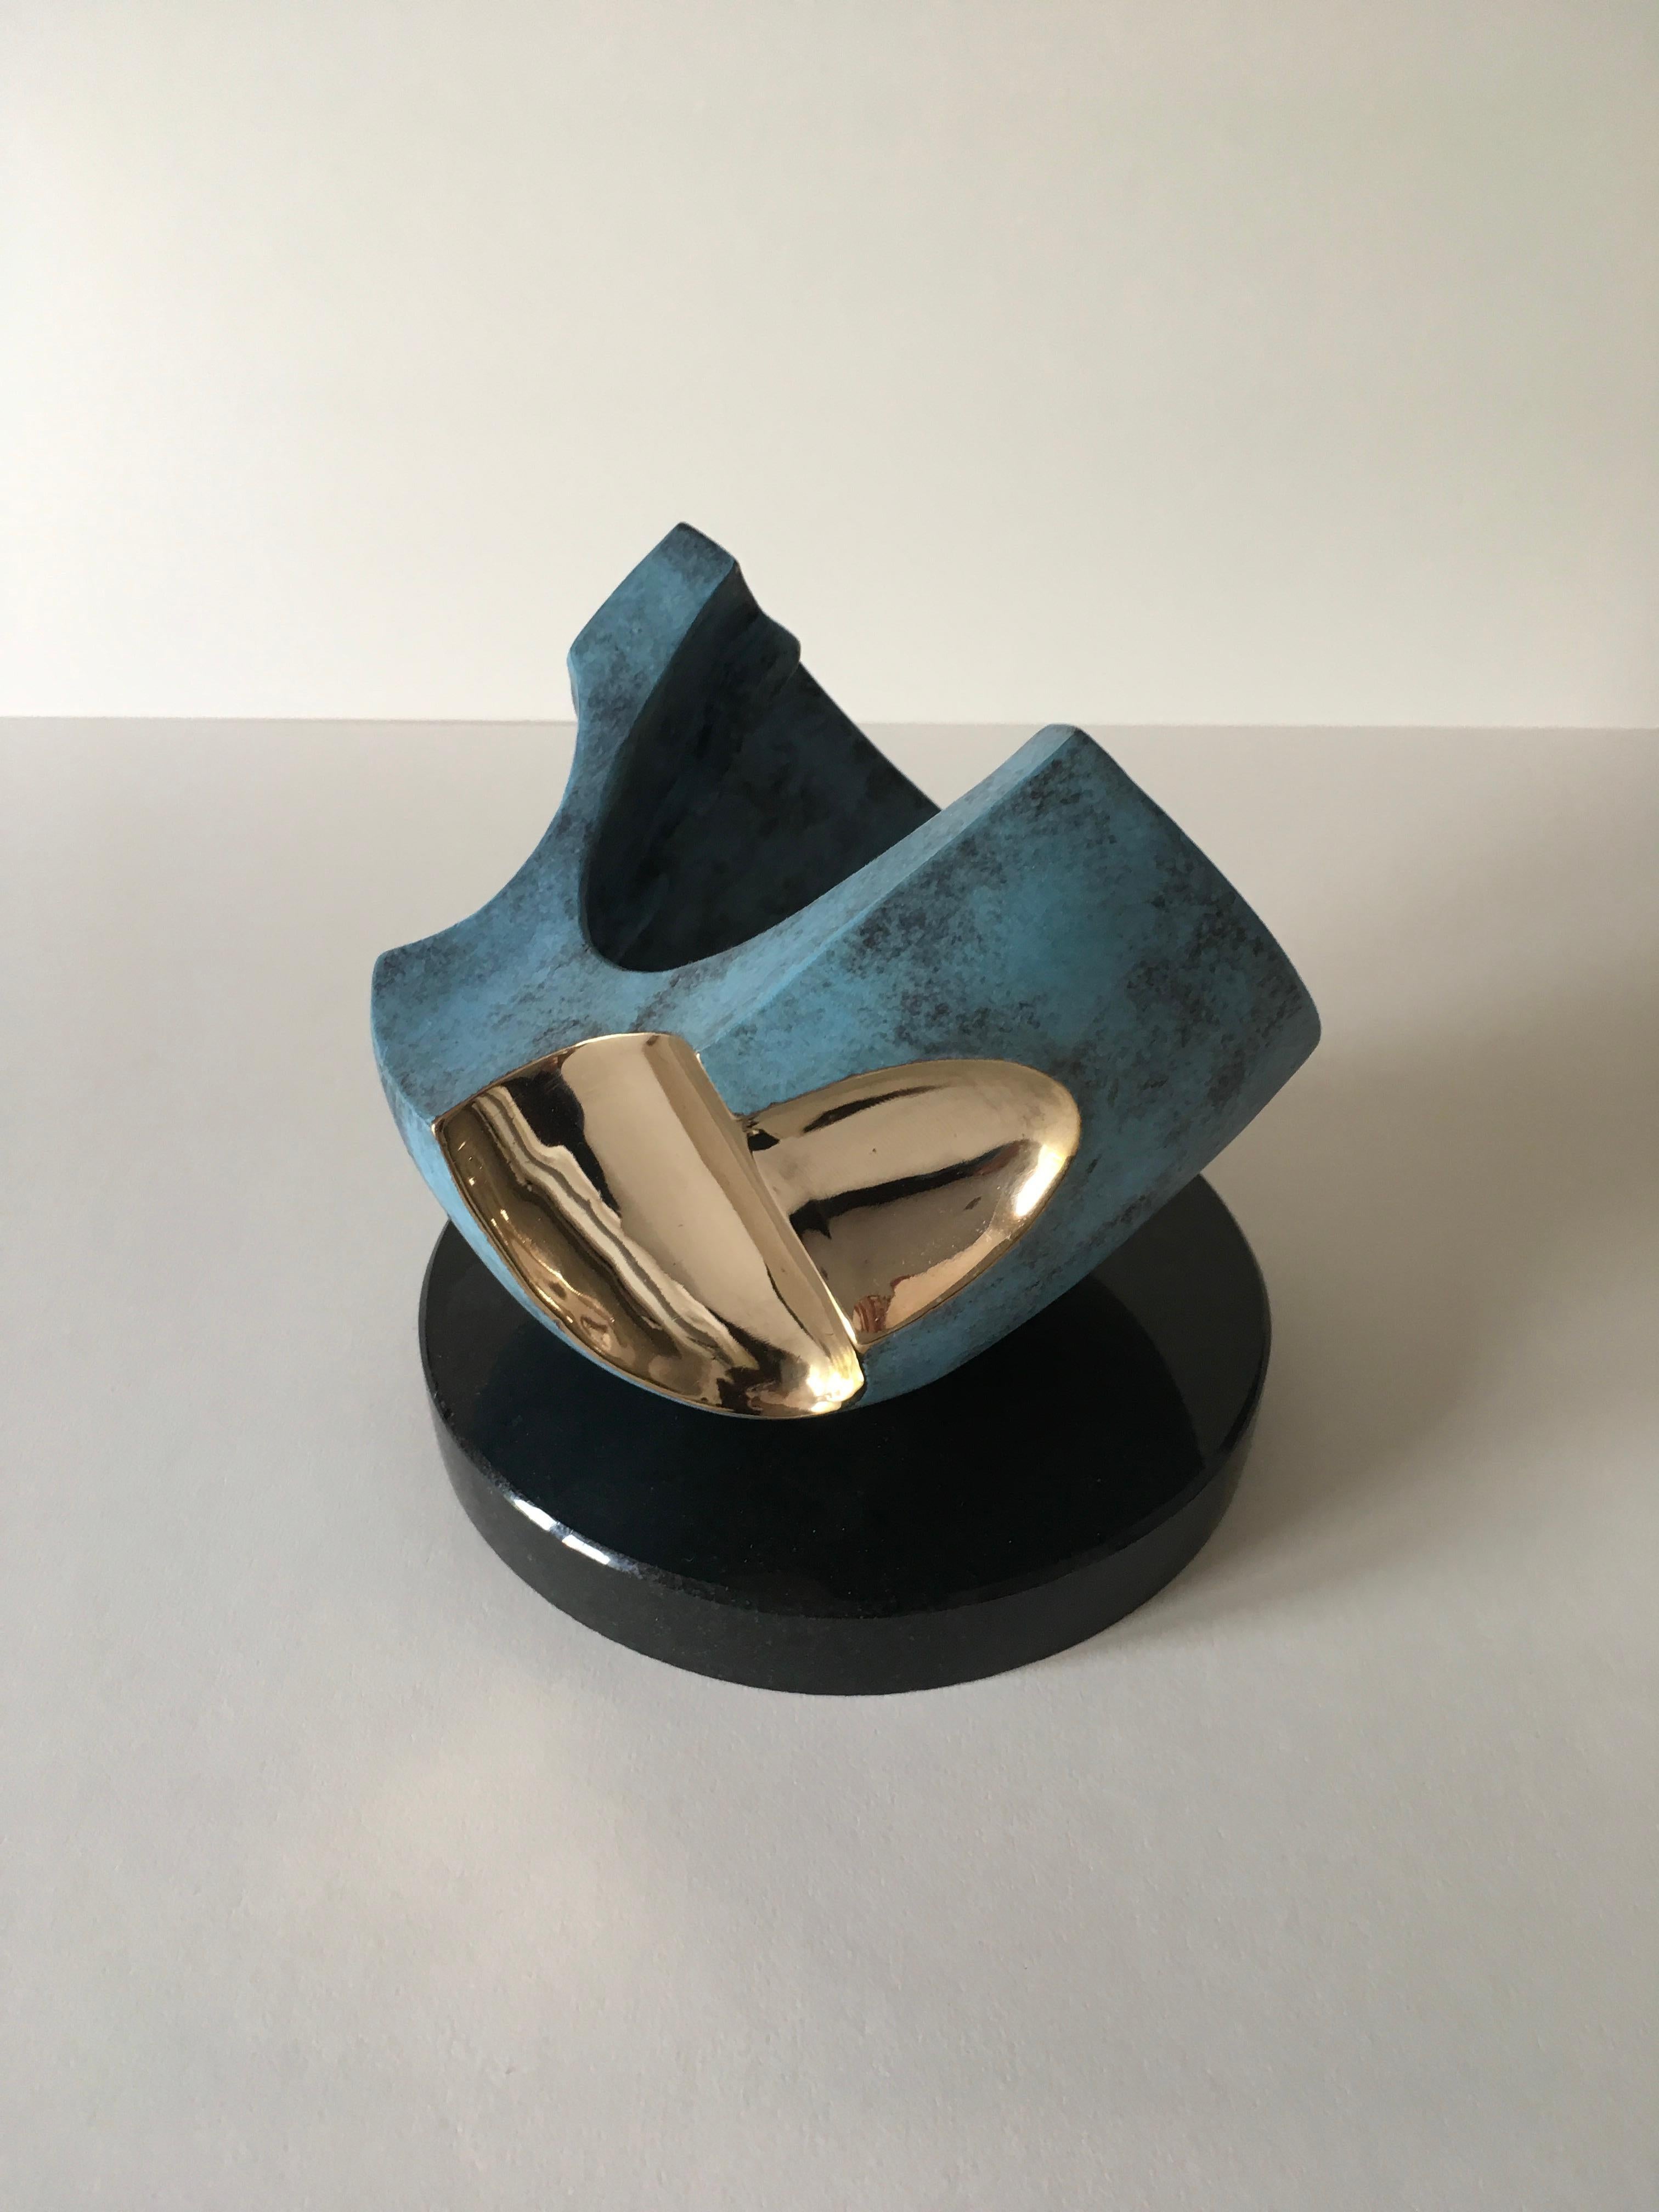 Cupped Hollow  - Tabletop limited edition sculpture Bronze  - Modern Sculpture by David Sprakes